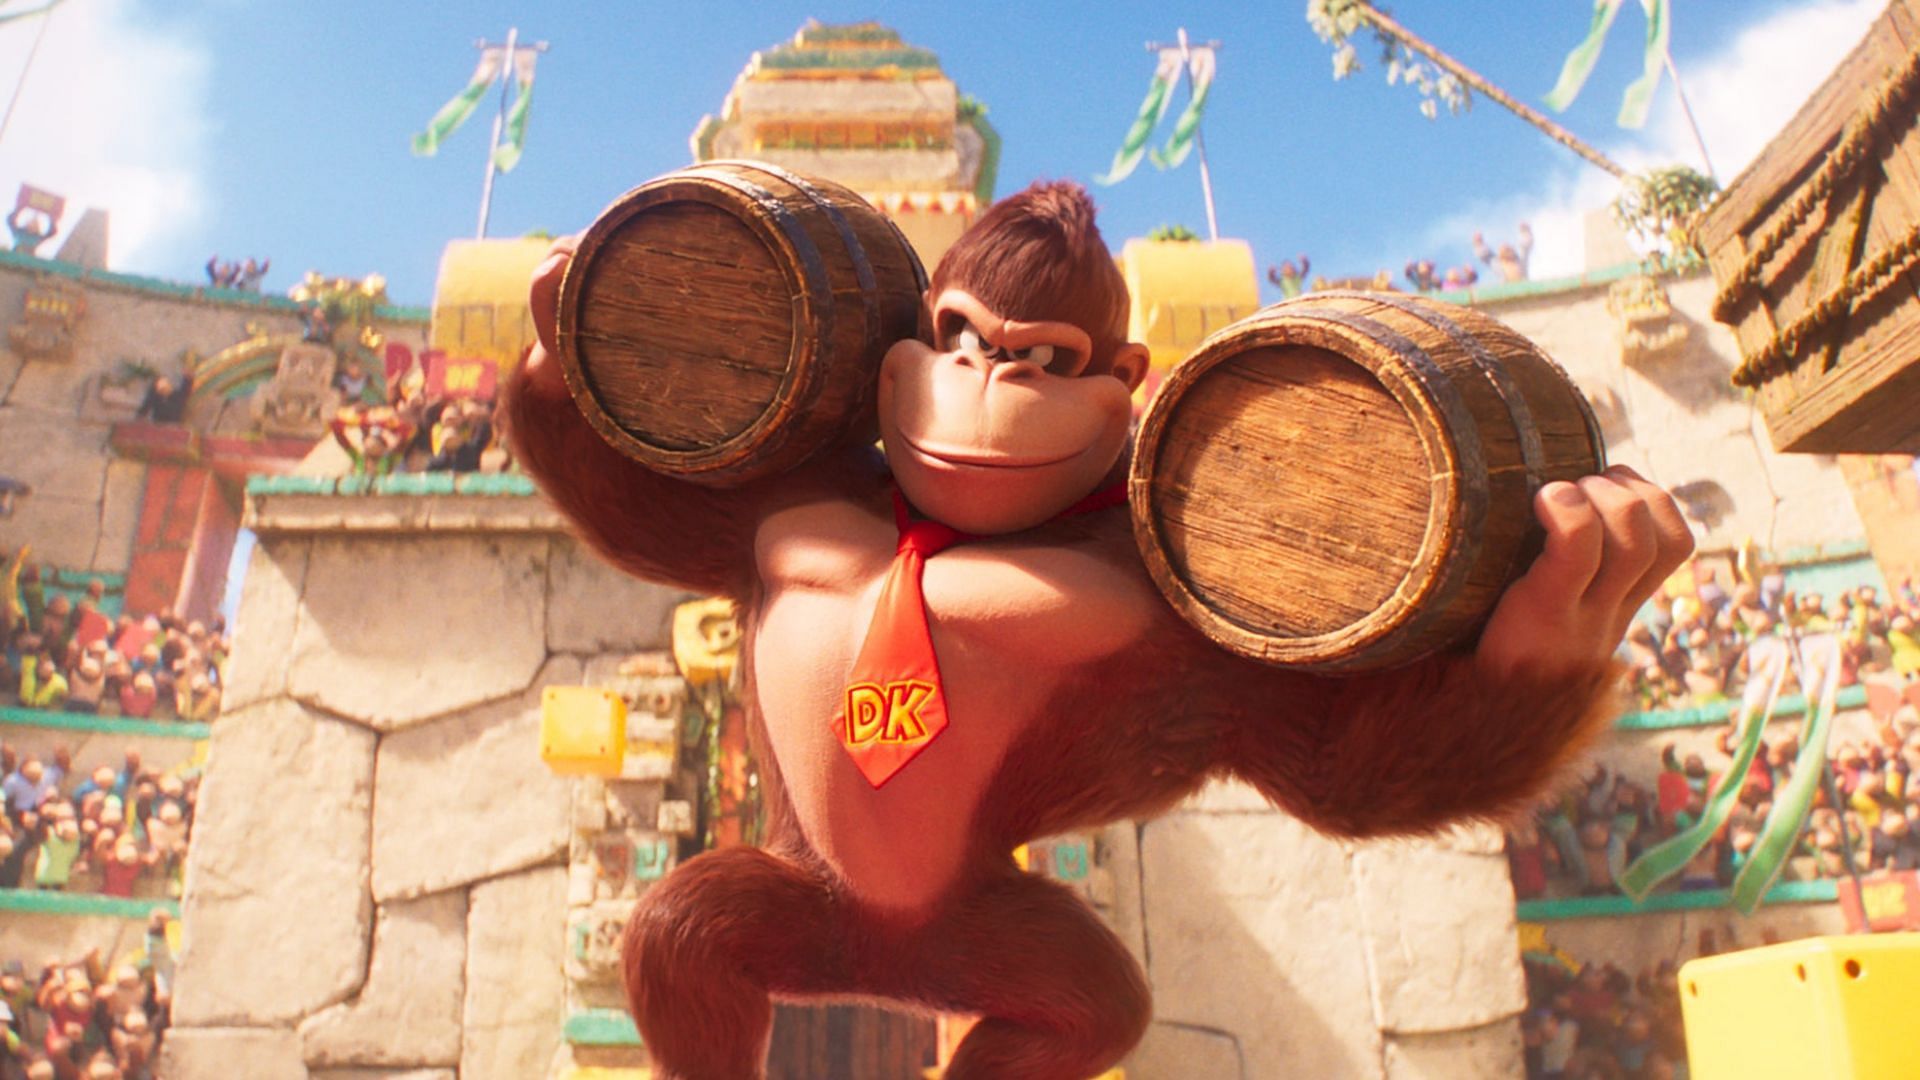 Donkey Kong is a mythical character in Super Mario (Image via Universal Pictures)